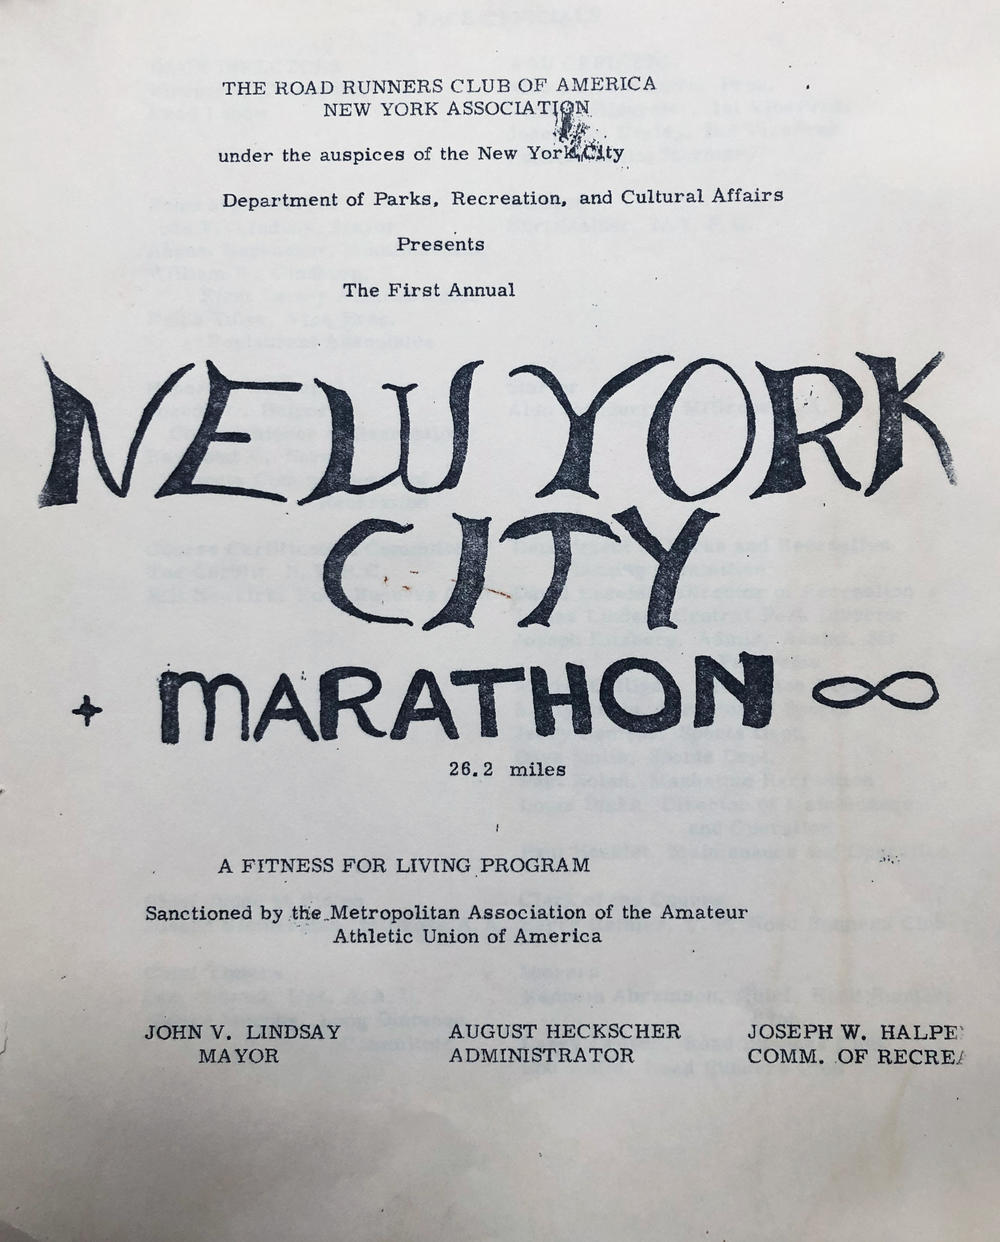 The program cover for the 1970 NYC Marathon.